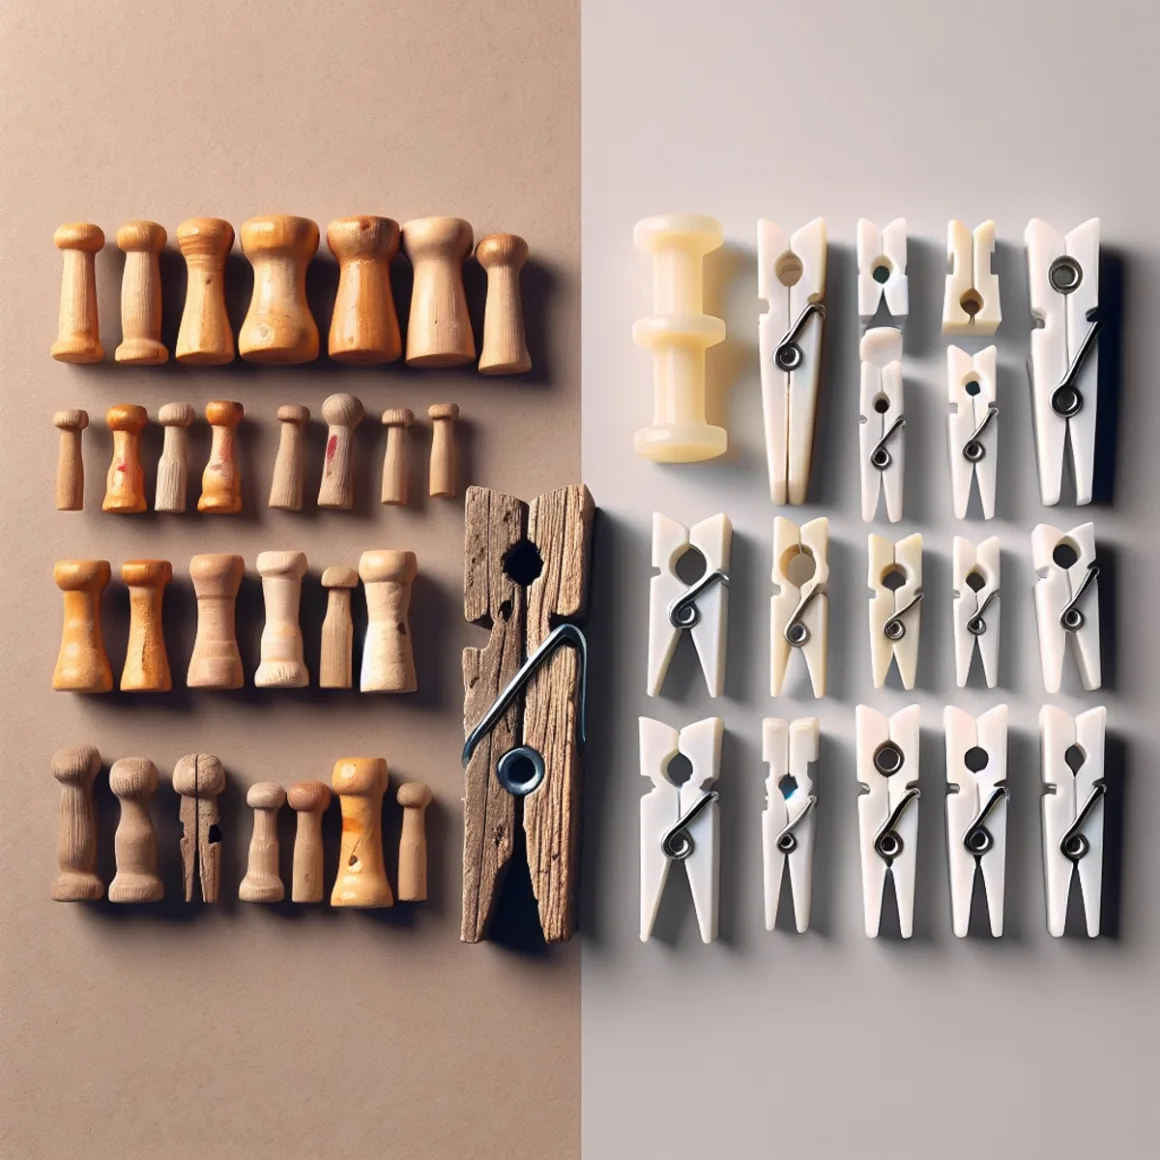 A handcrafted wooden peg with marks and irregularities next to a machine-produced plastic peg, representing the contrast between human touch and mass production.